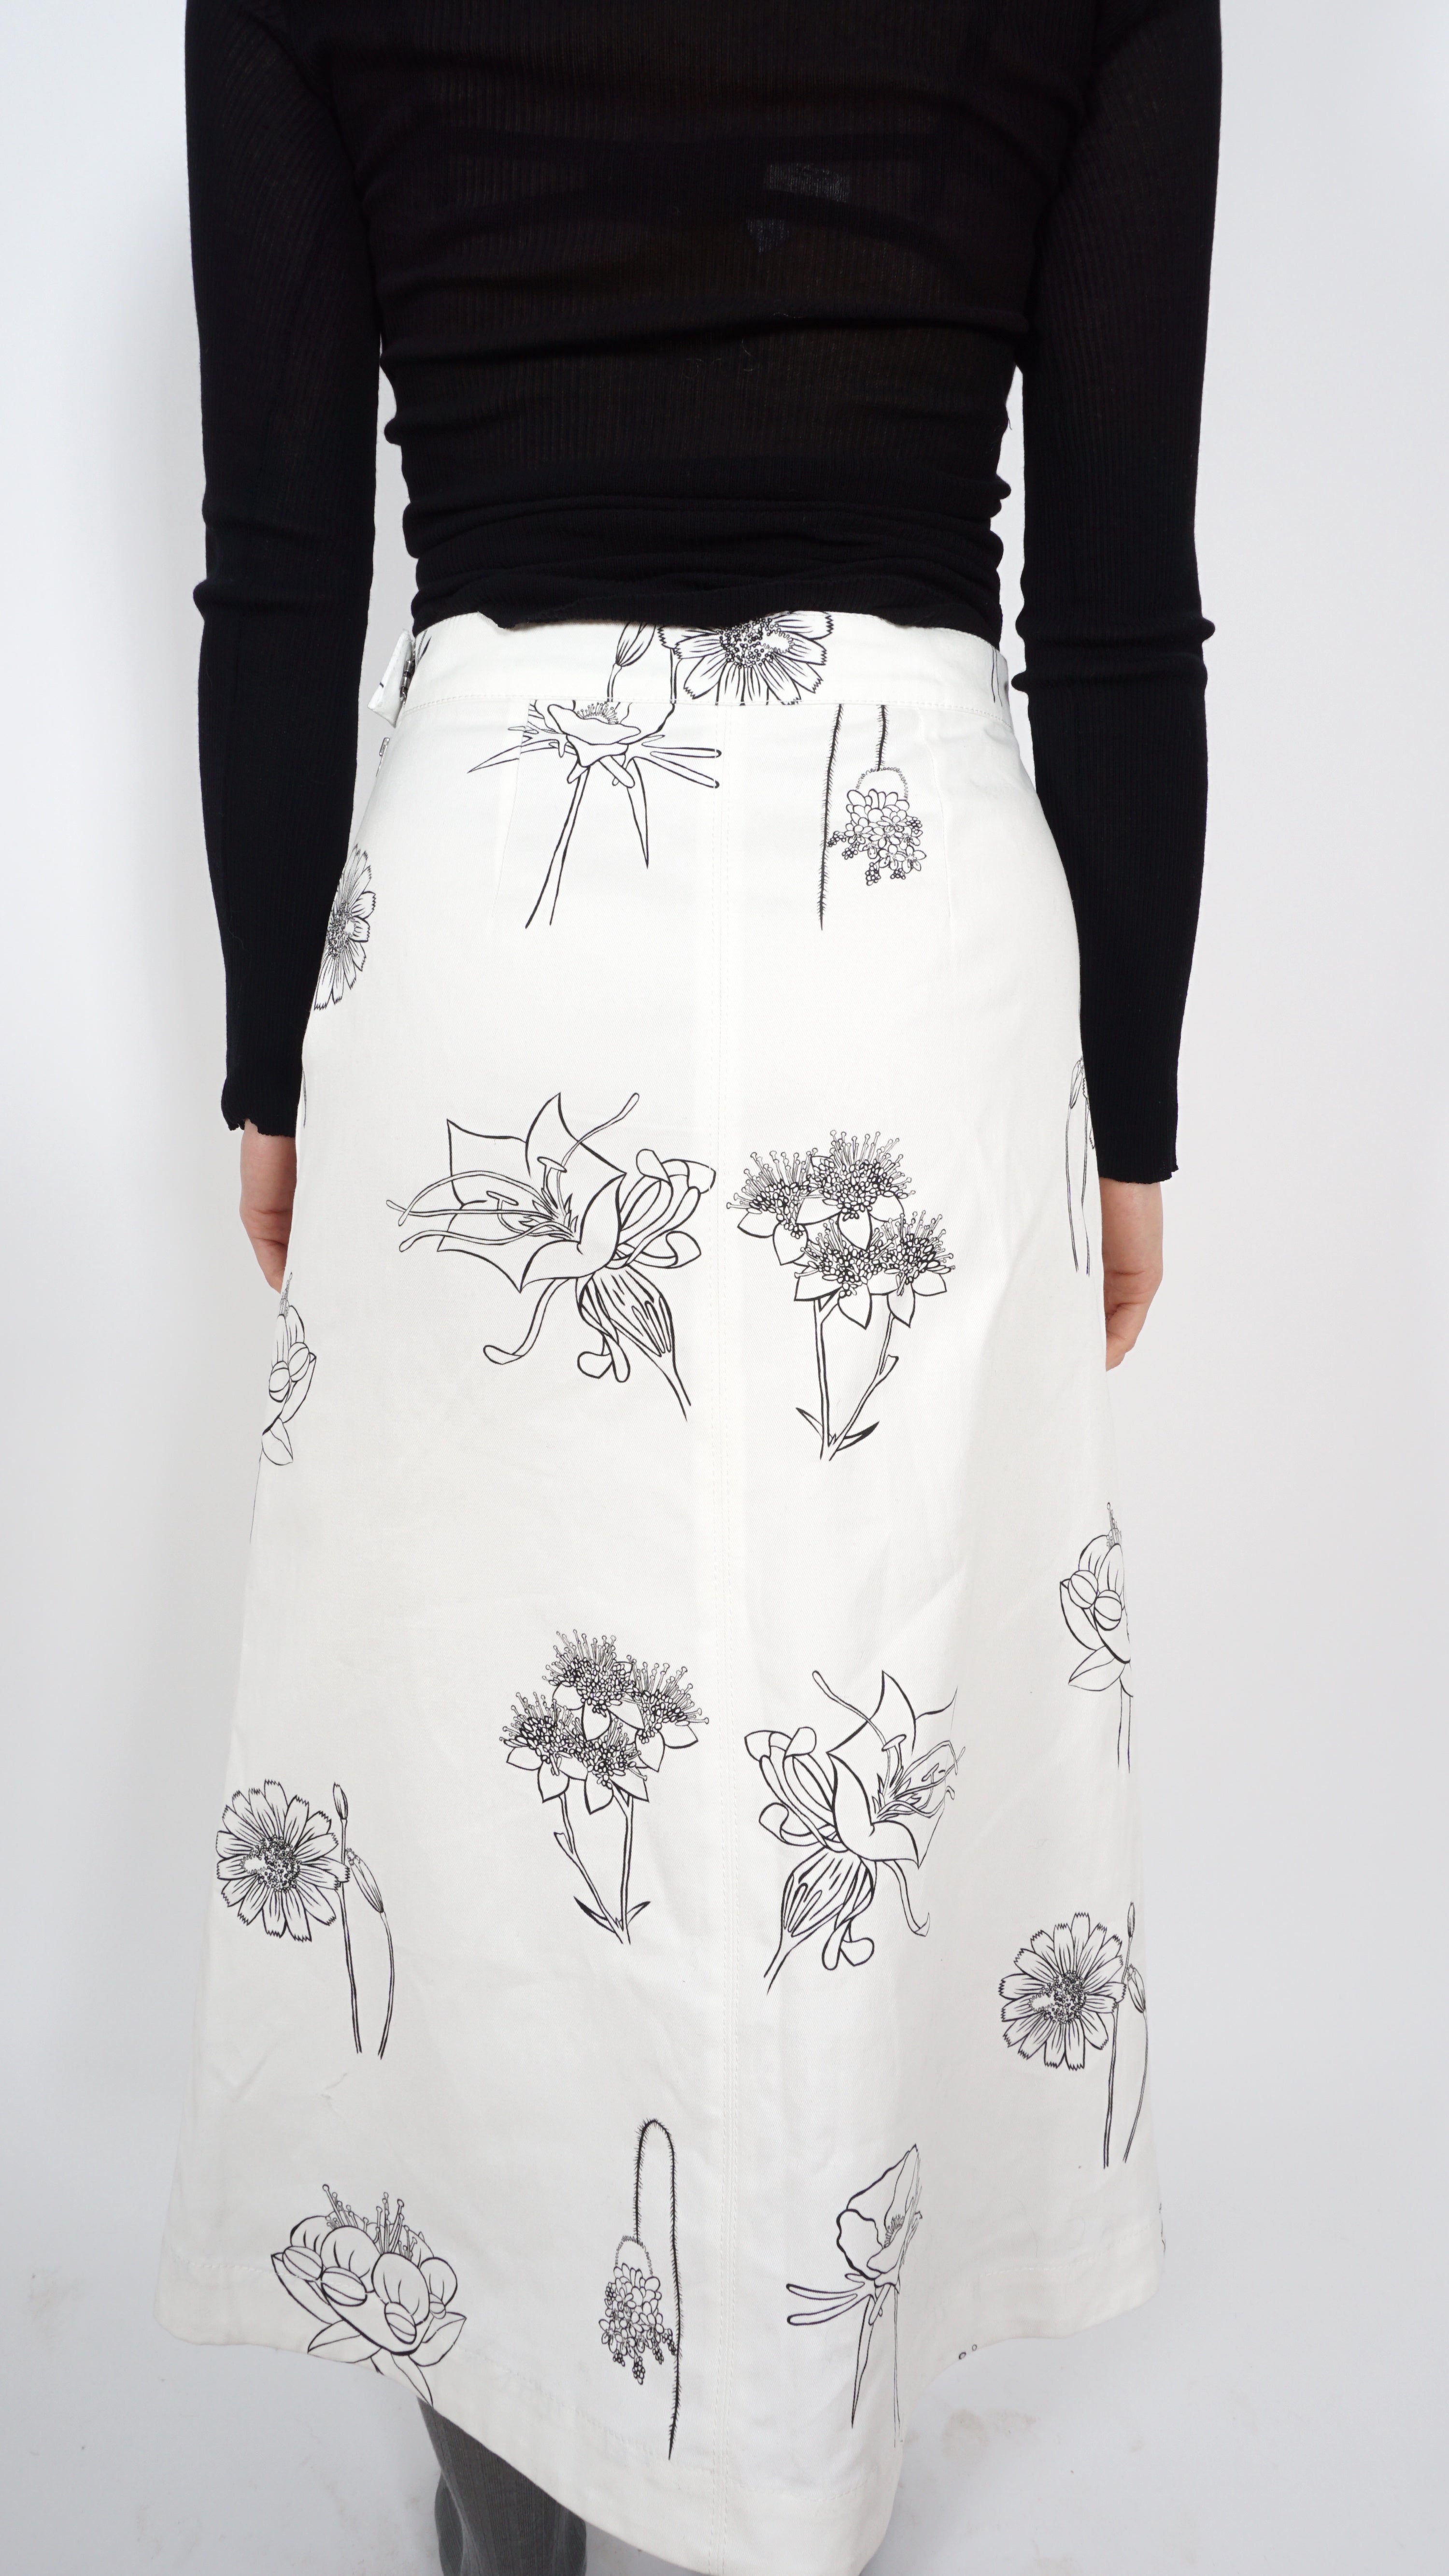 Flower skirt by Maria Holm